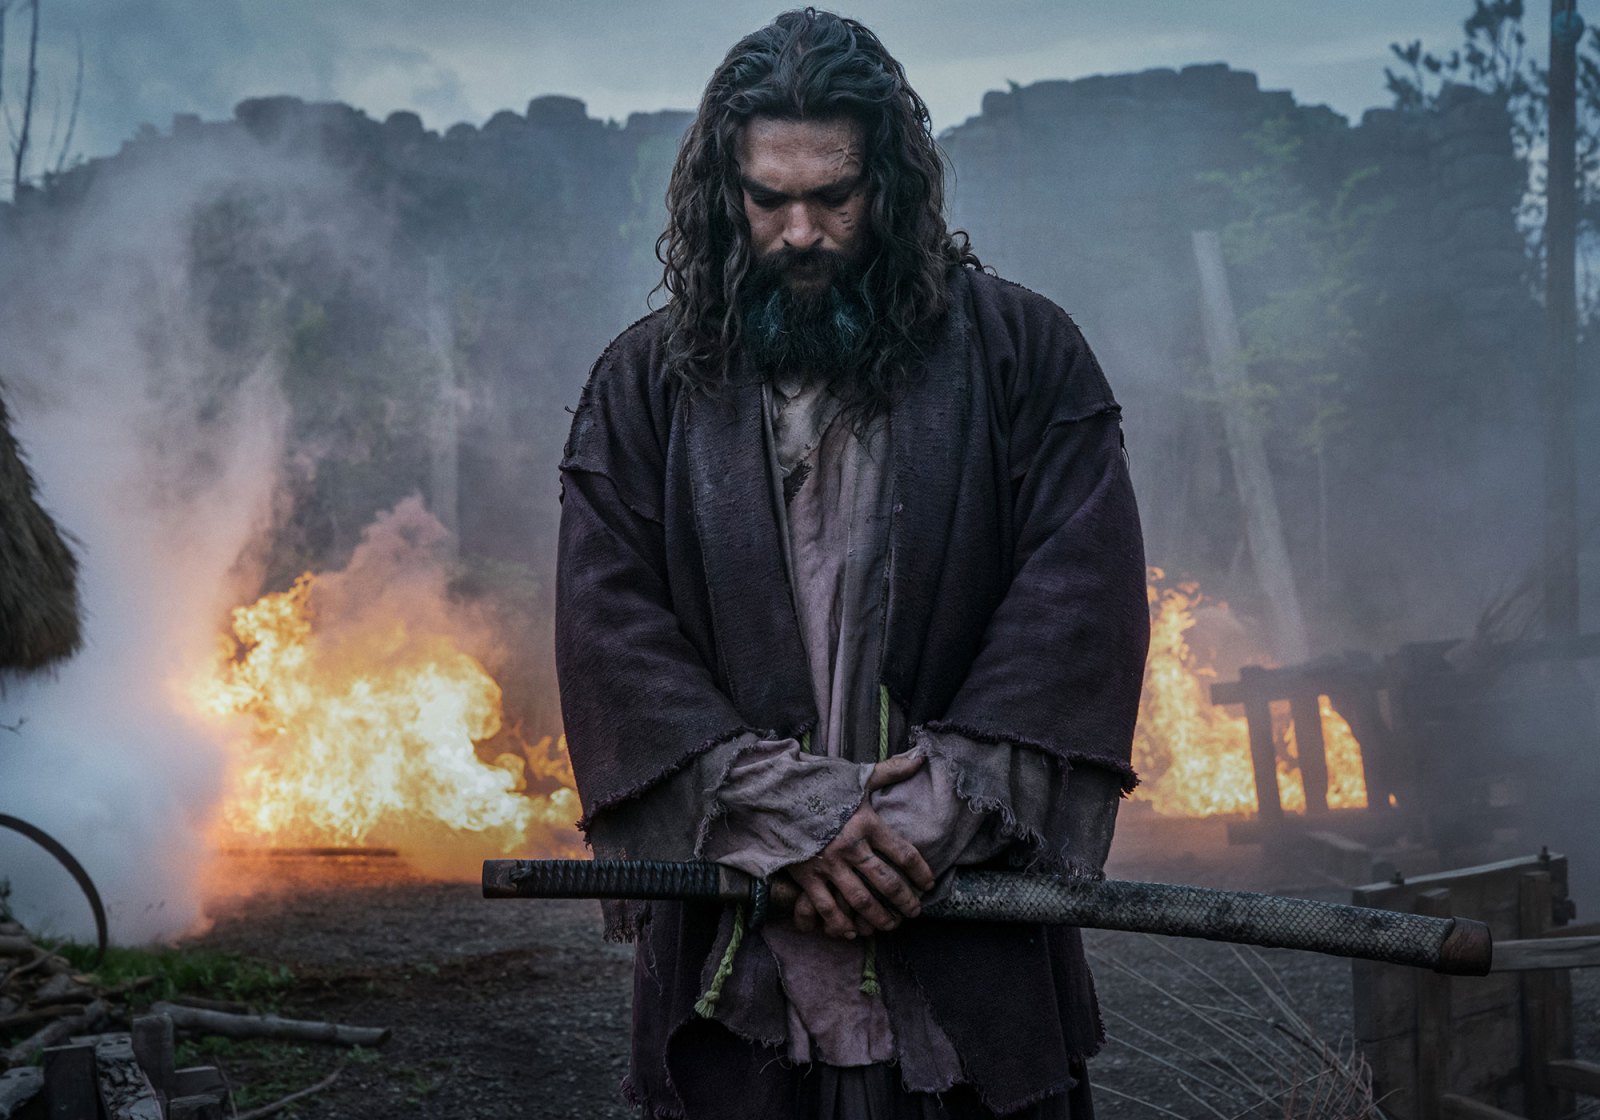 Baba Voss' Last Battle! Jason Momoa's 'See' to End After 2 Seasons